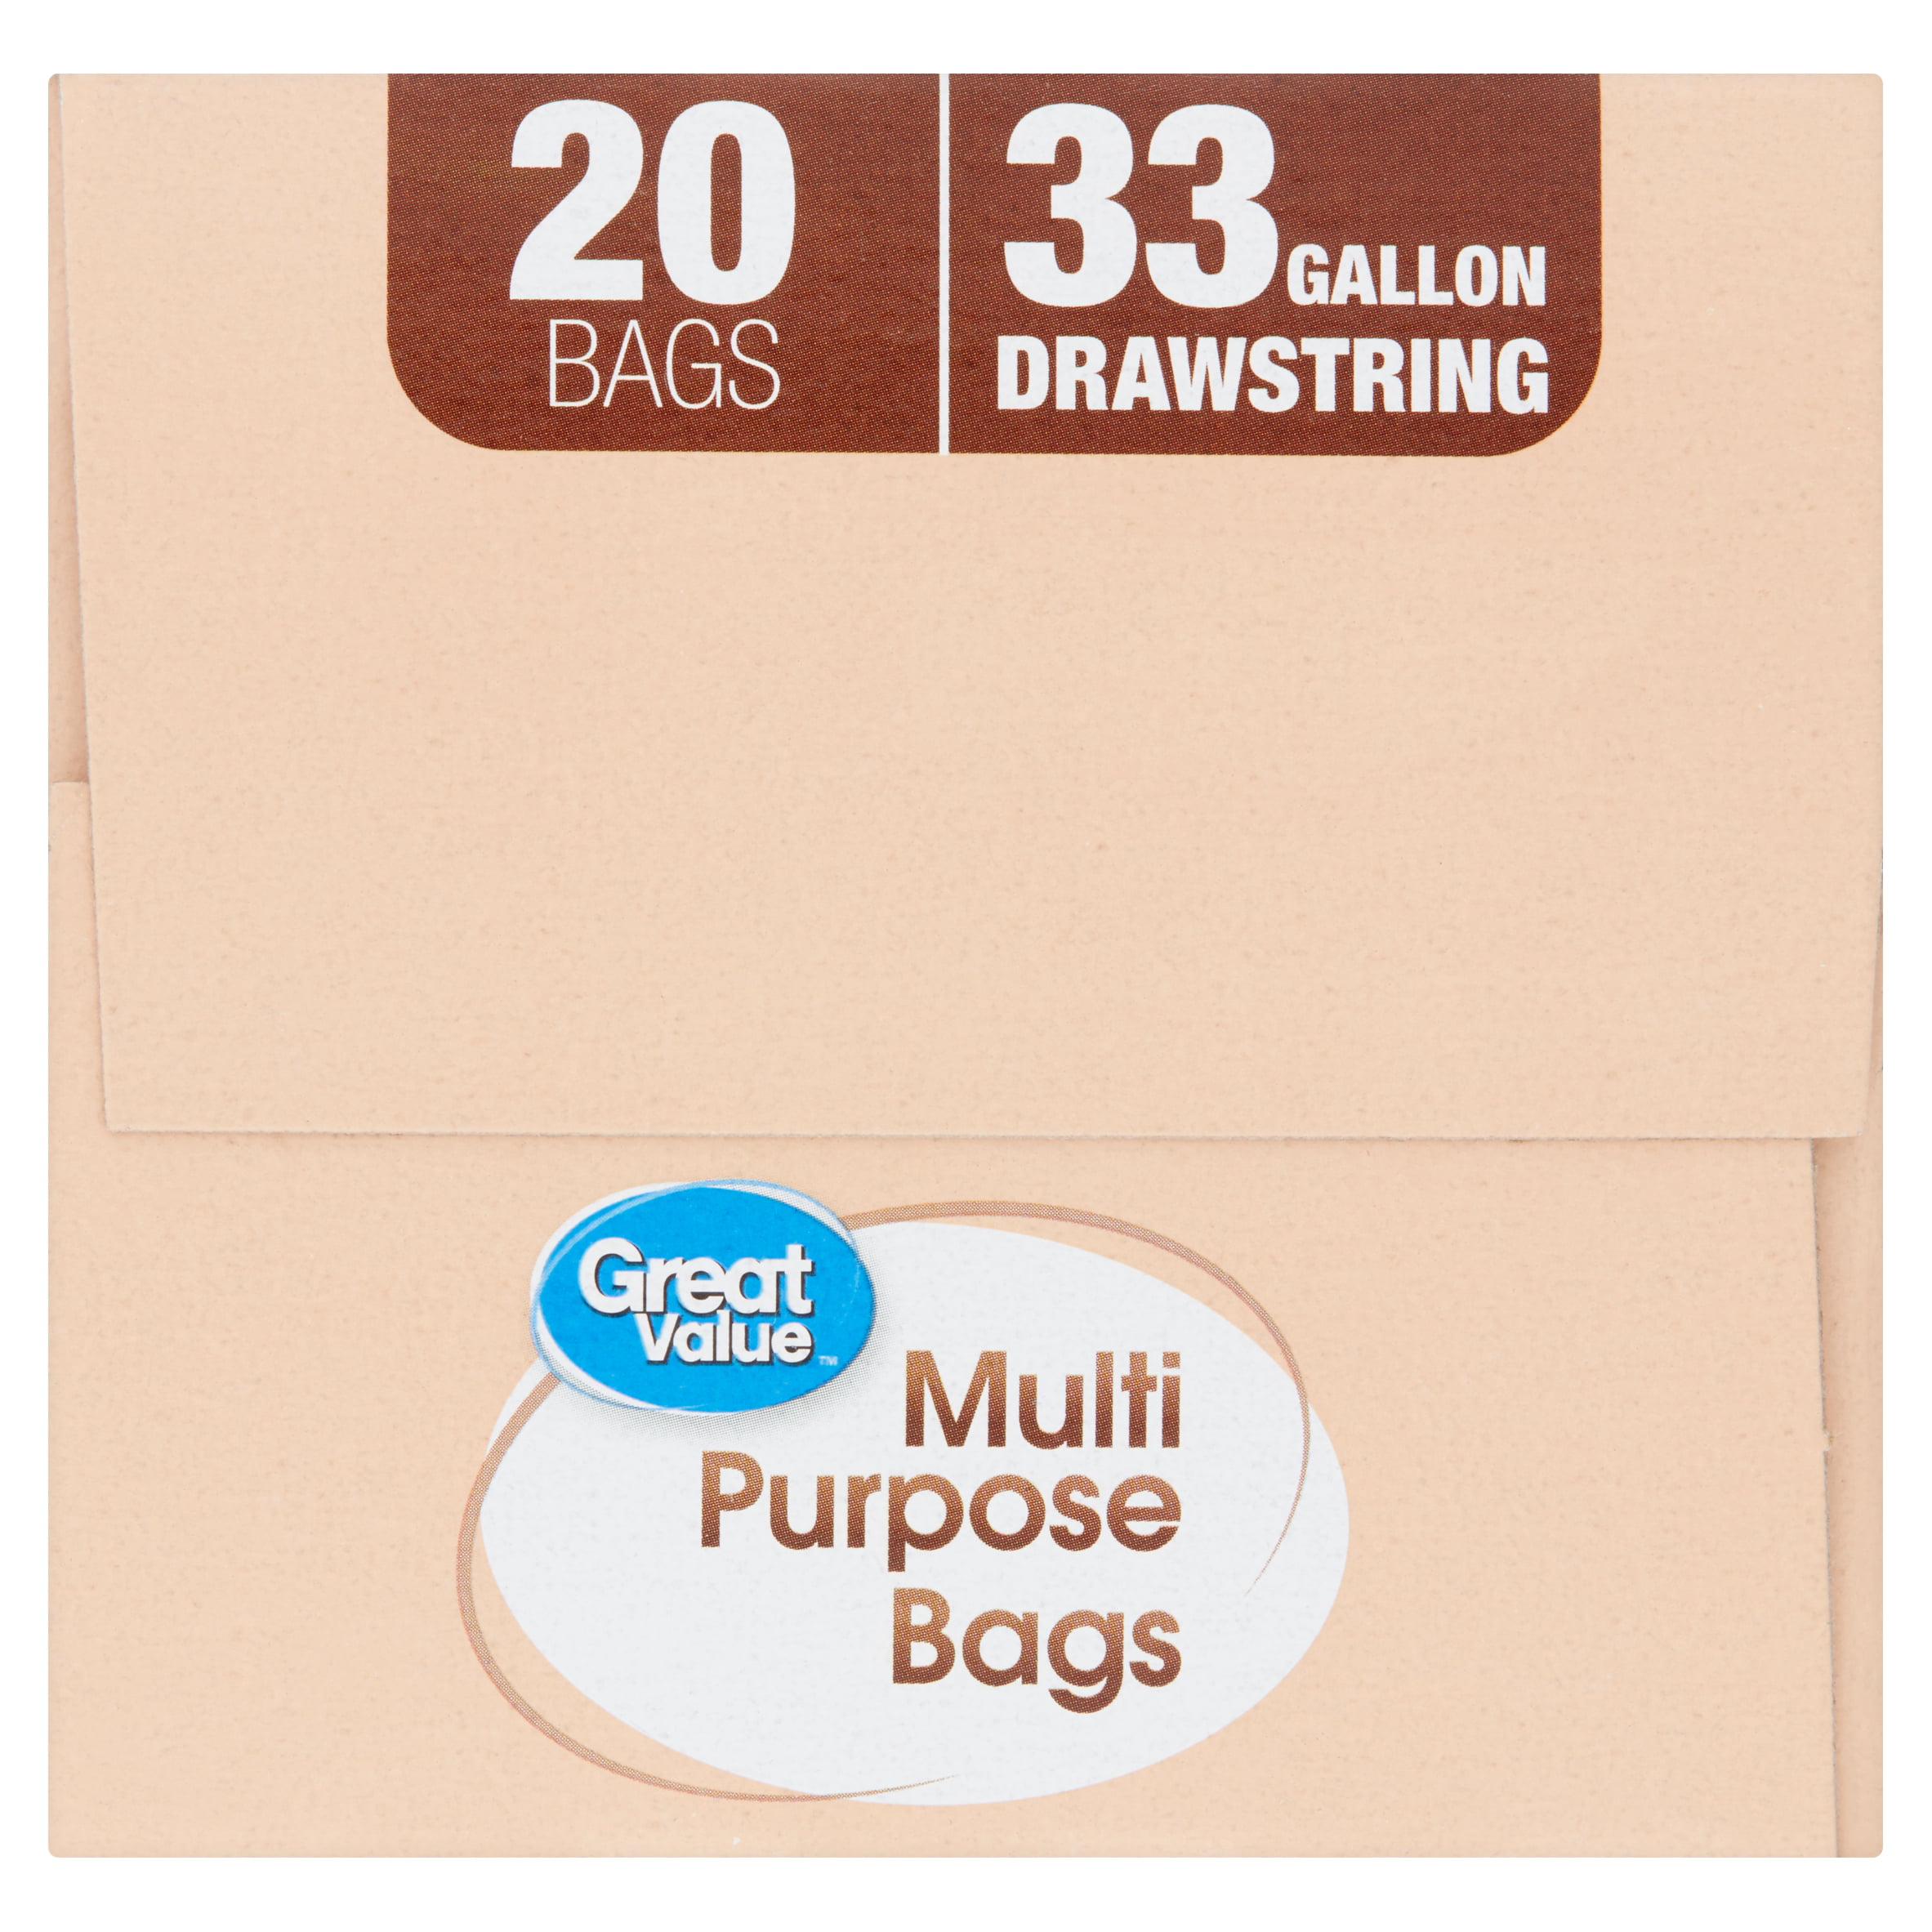 Great Value Strong Flex Multi-Purpose Drawstring Bags, 33 Gallon, 20 Count  - DroneUp Delivery